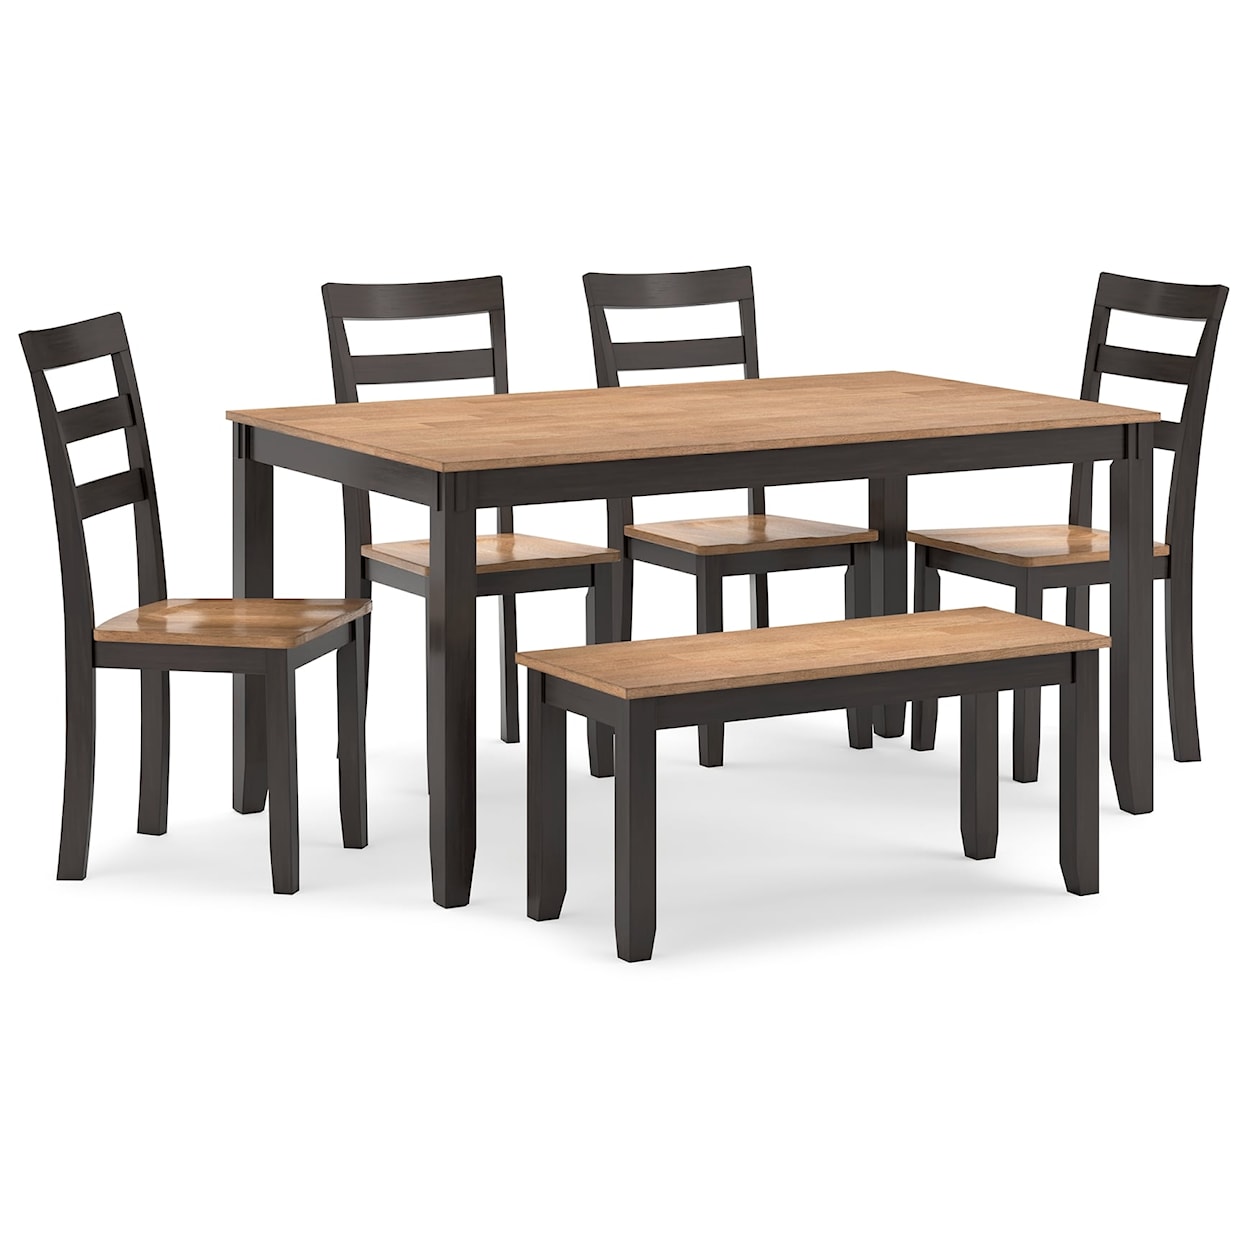 Signature Design by Ashley Furniture Gesthaven Dining Room Table Set (Set of 6)